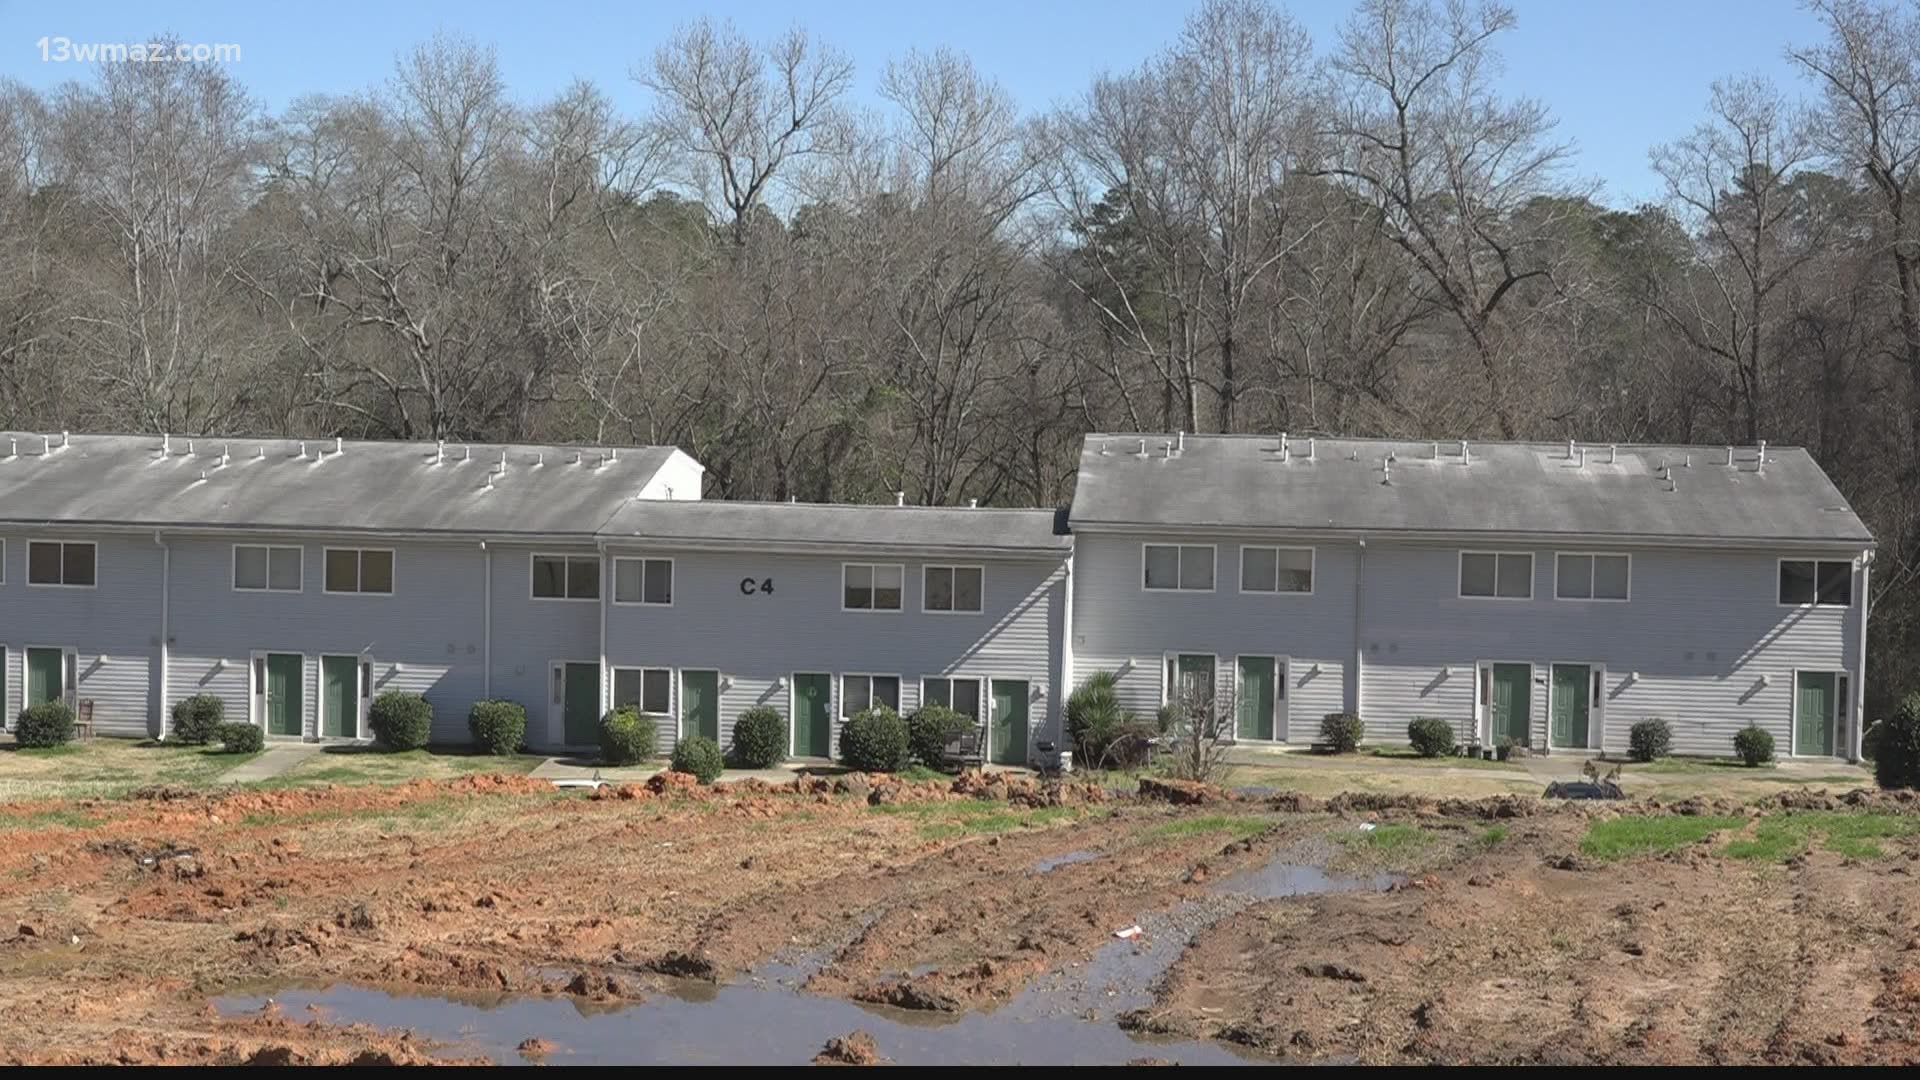 After a Macon woman shared pictures showing sewage and feces outside at the Green Meadows Townhouses, we asked the county what can be done.